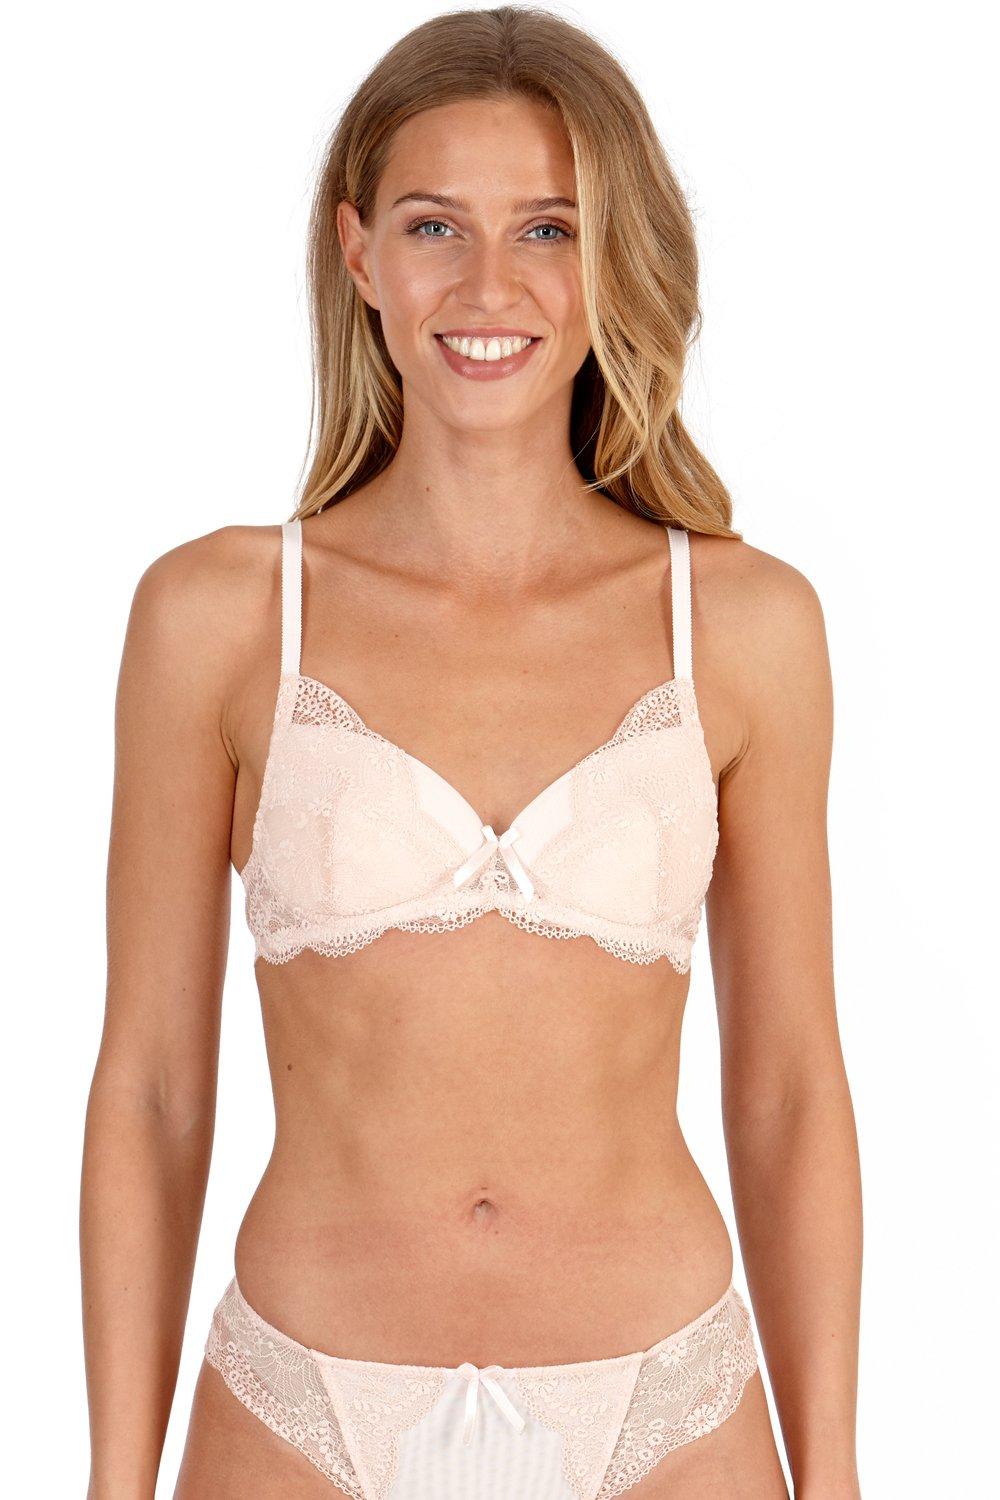 'OLIVIA' Non Wired Medium Padded Classic Small Cup Bra